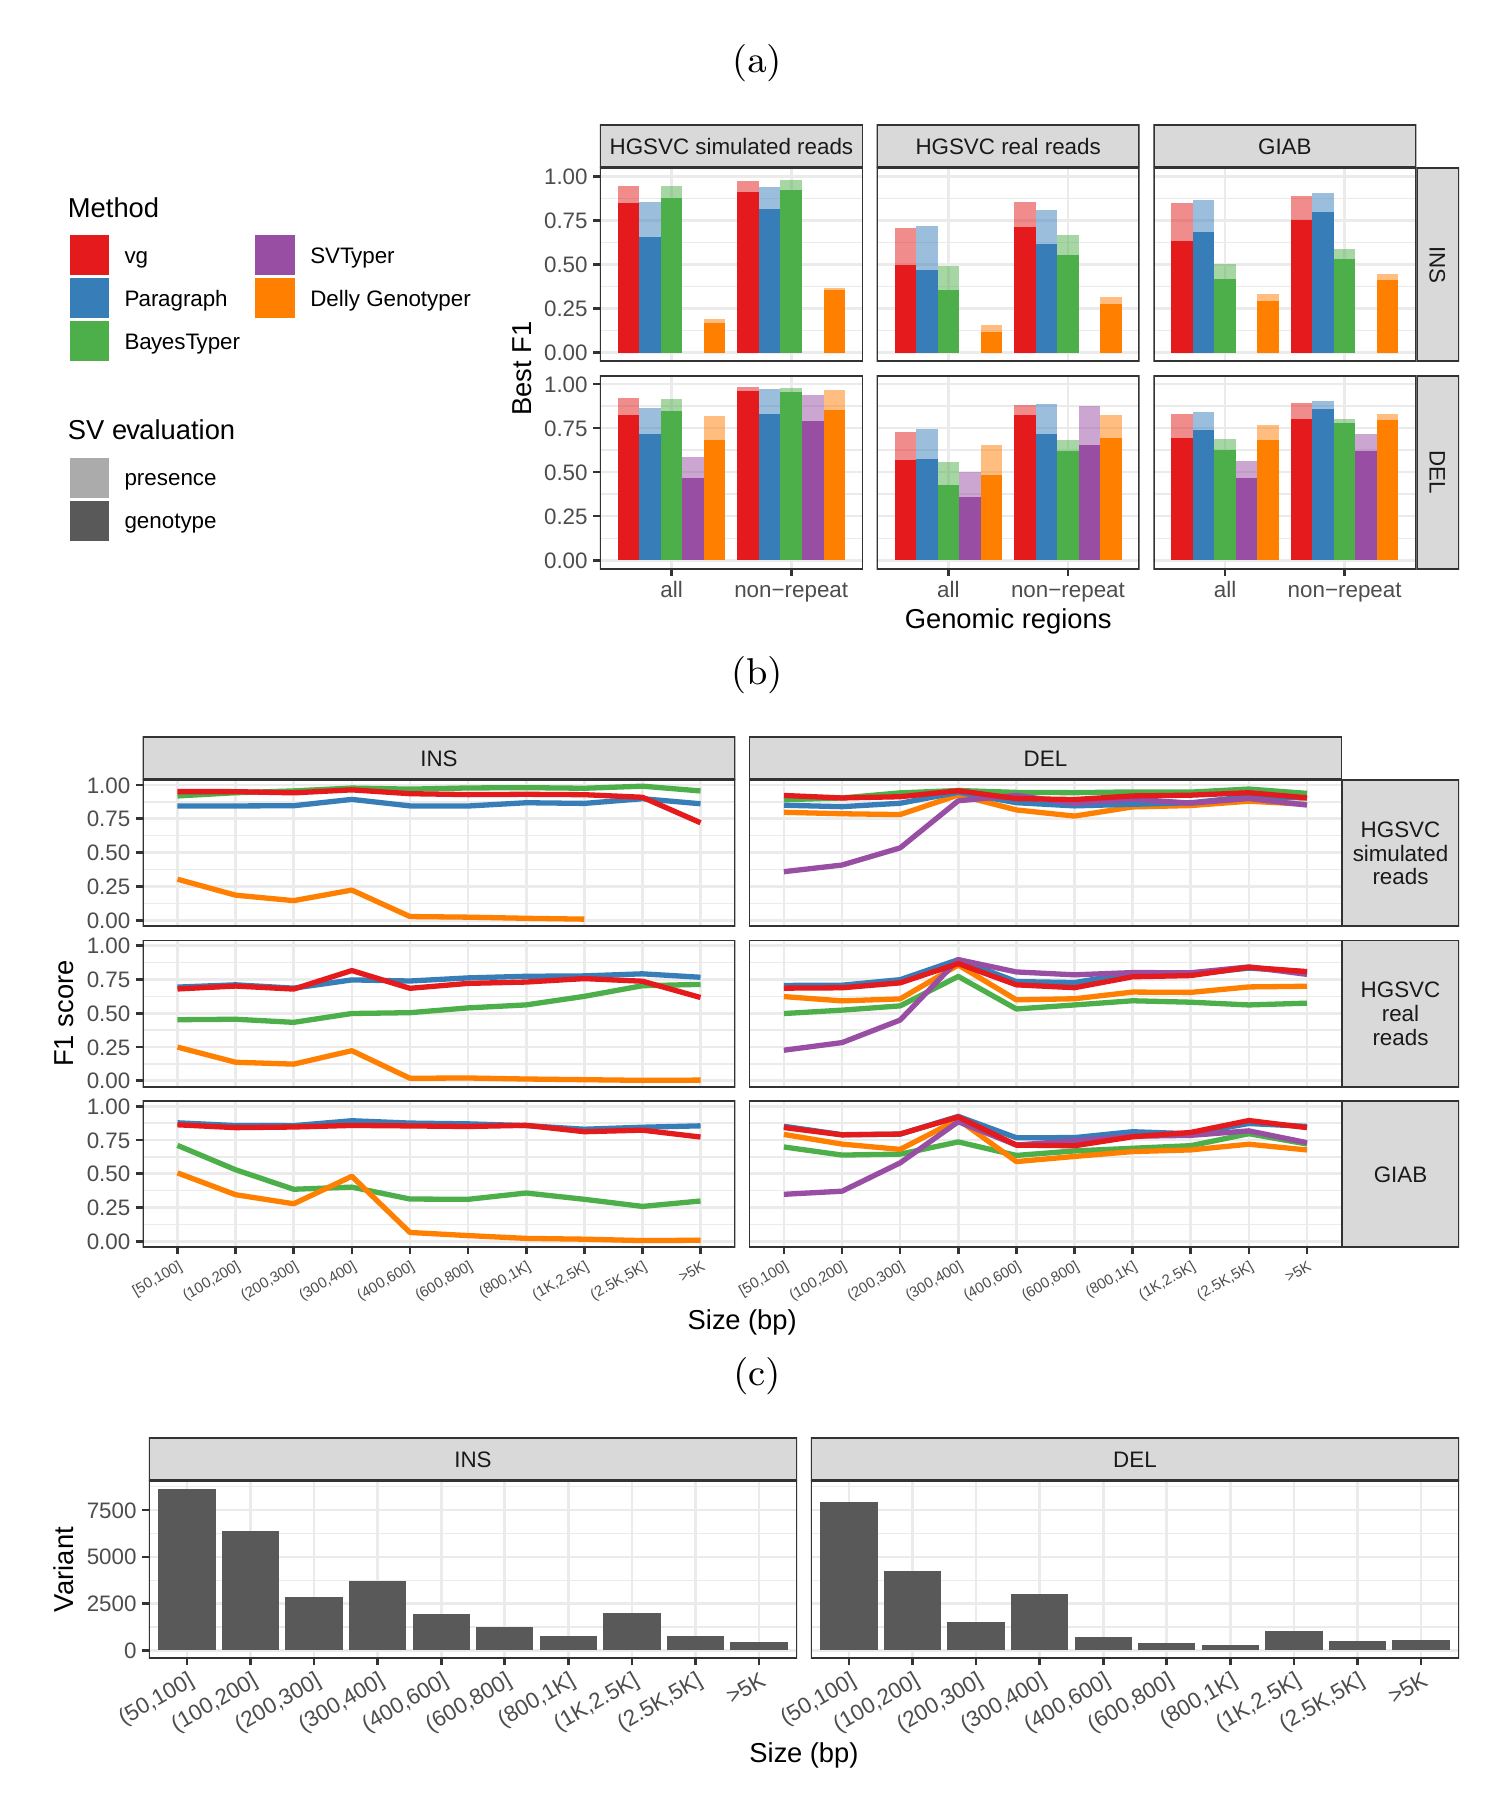 Figure 2: Structural variants from the HGSVC and Genome in a Bottle datasets. HGSVC: Simulated and real reads were used to genotype SVs and compared with the high-quality calls from Chaisson et al.[22]. Reads were simulated from the HG00514 individual. Using real reads, the three HG00514, HG00733, and NA19240 individuals were tested. GIAB: Real reads from the HG002 individual were used to genotype SVs and compared with the high-quality calls from the Genome in a Bottle consortium[21,23,25]. a) Maximum F1 score for each method (color), across the whole genome or focusing on non-repeat regions (x-axis). We evaluated the ability to predict the presence of an SV (transparent bars) and the exact genotype (solid bars). Results are separated across panels by variant type: insertions and deletions. SVTyper cannot genotype insertions, hence the missing bars in the top panels. b) Maximum F1 score for different size classes when evaluating on the presence of SVs across the whole genome. c) Size distribution of SVs in the HGSVC and GIAB catalogs.